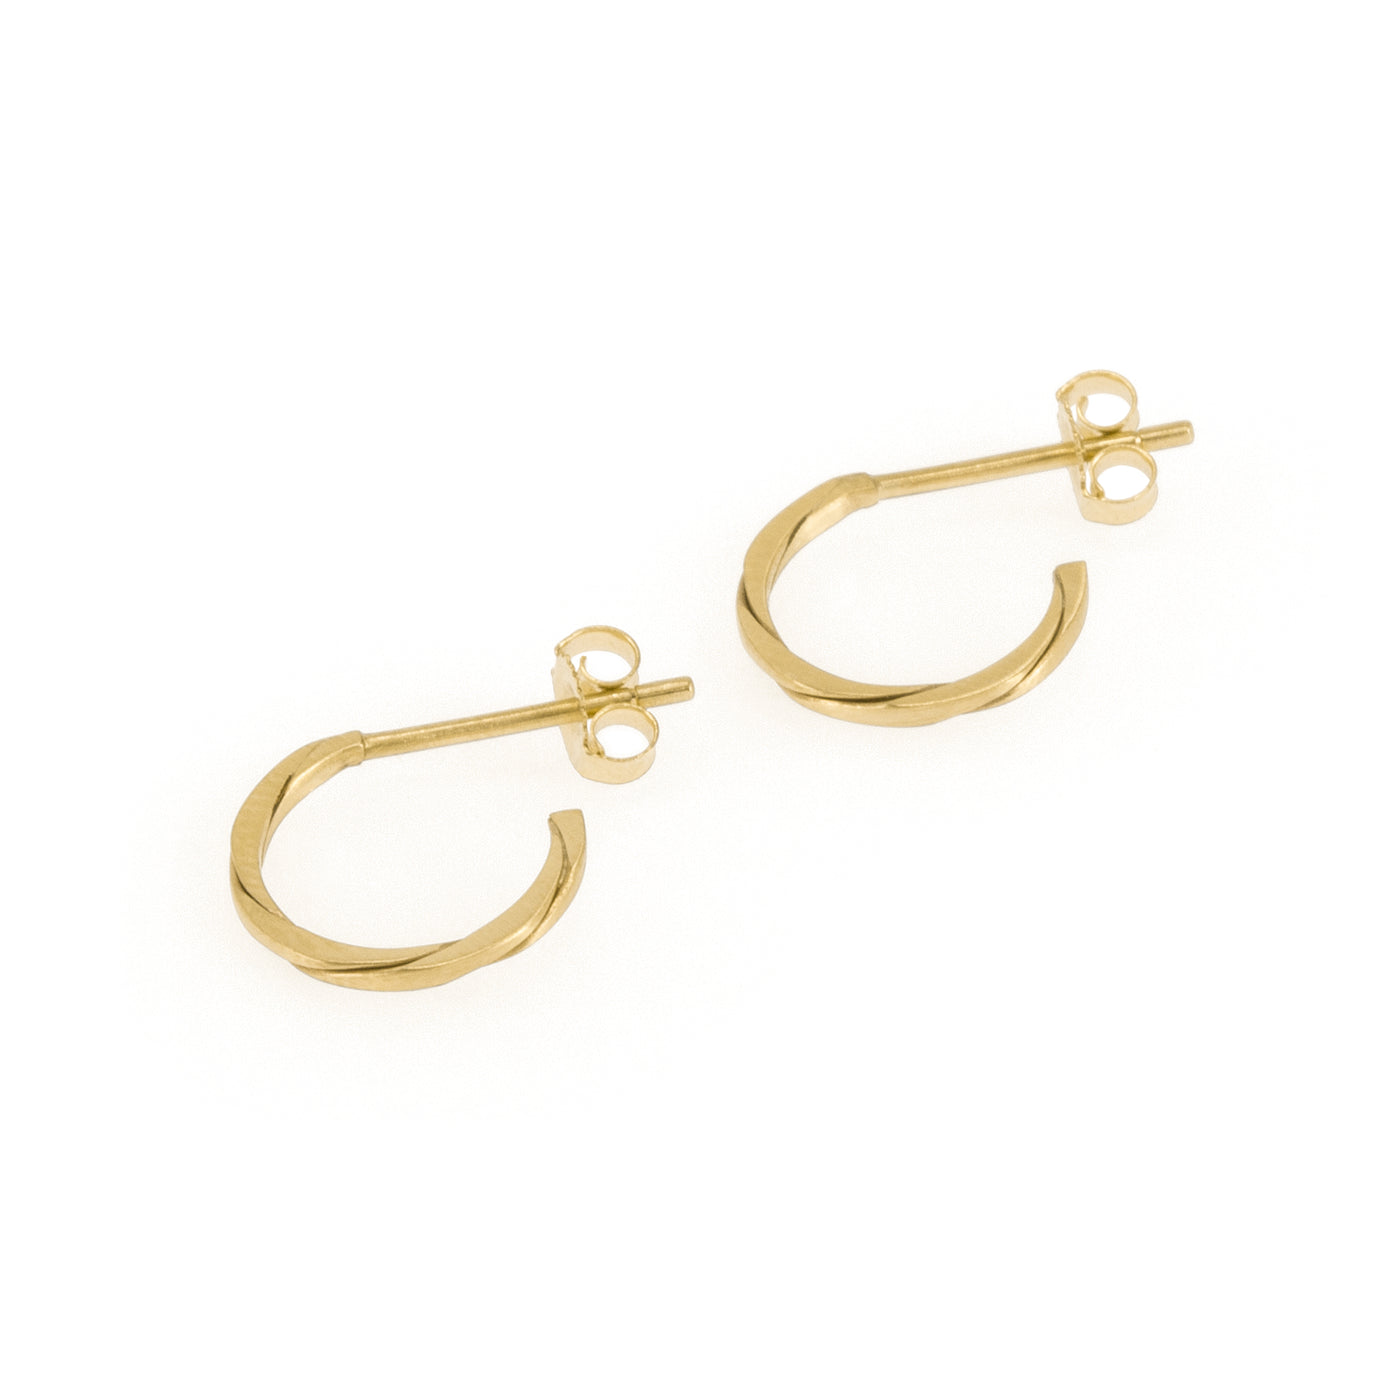 Eco-friendly gold earrings. These sustainable Twist Hoops are handmade in Cape Town in recycled gold from e-waste.